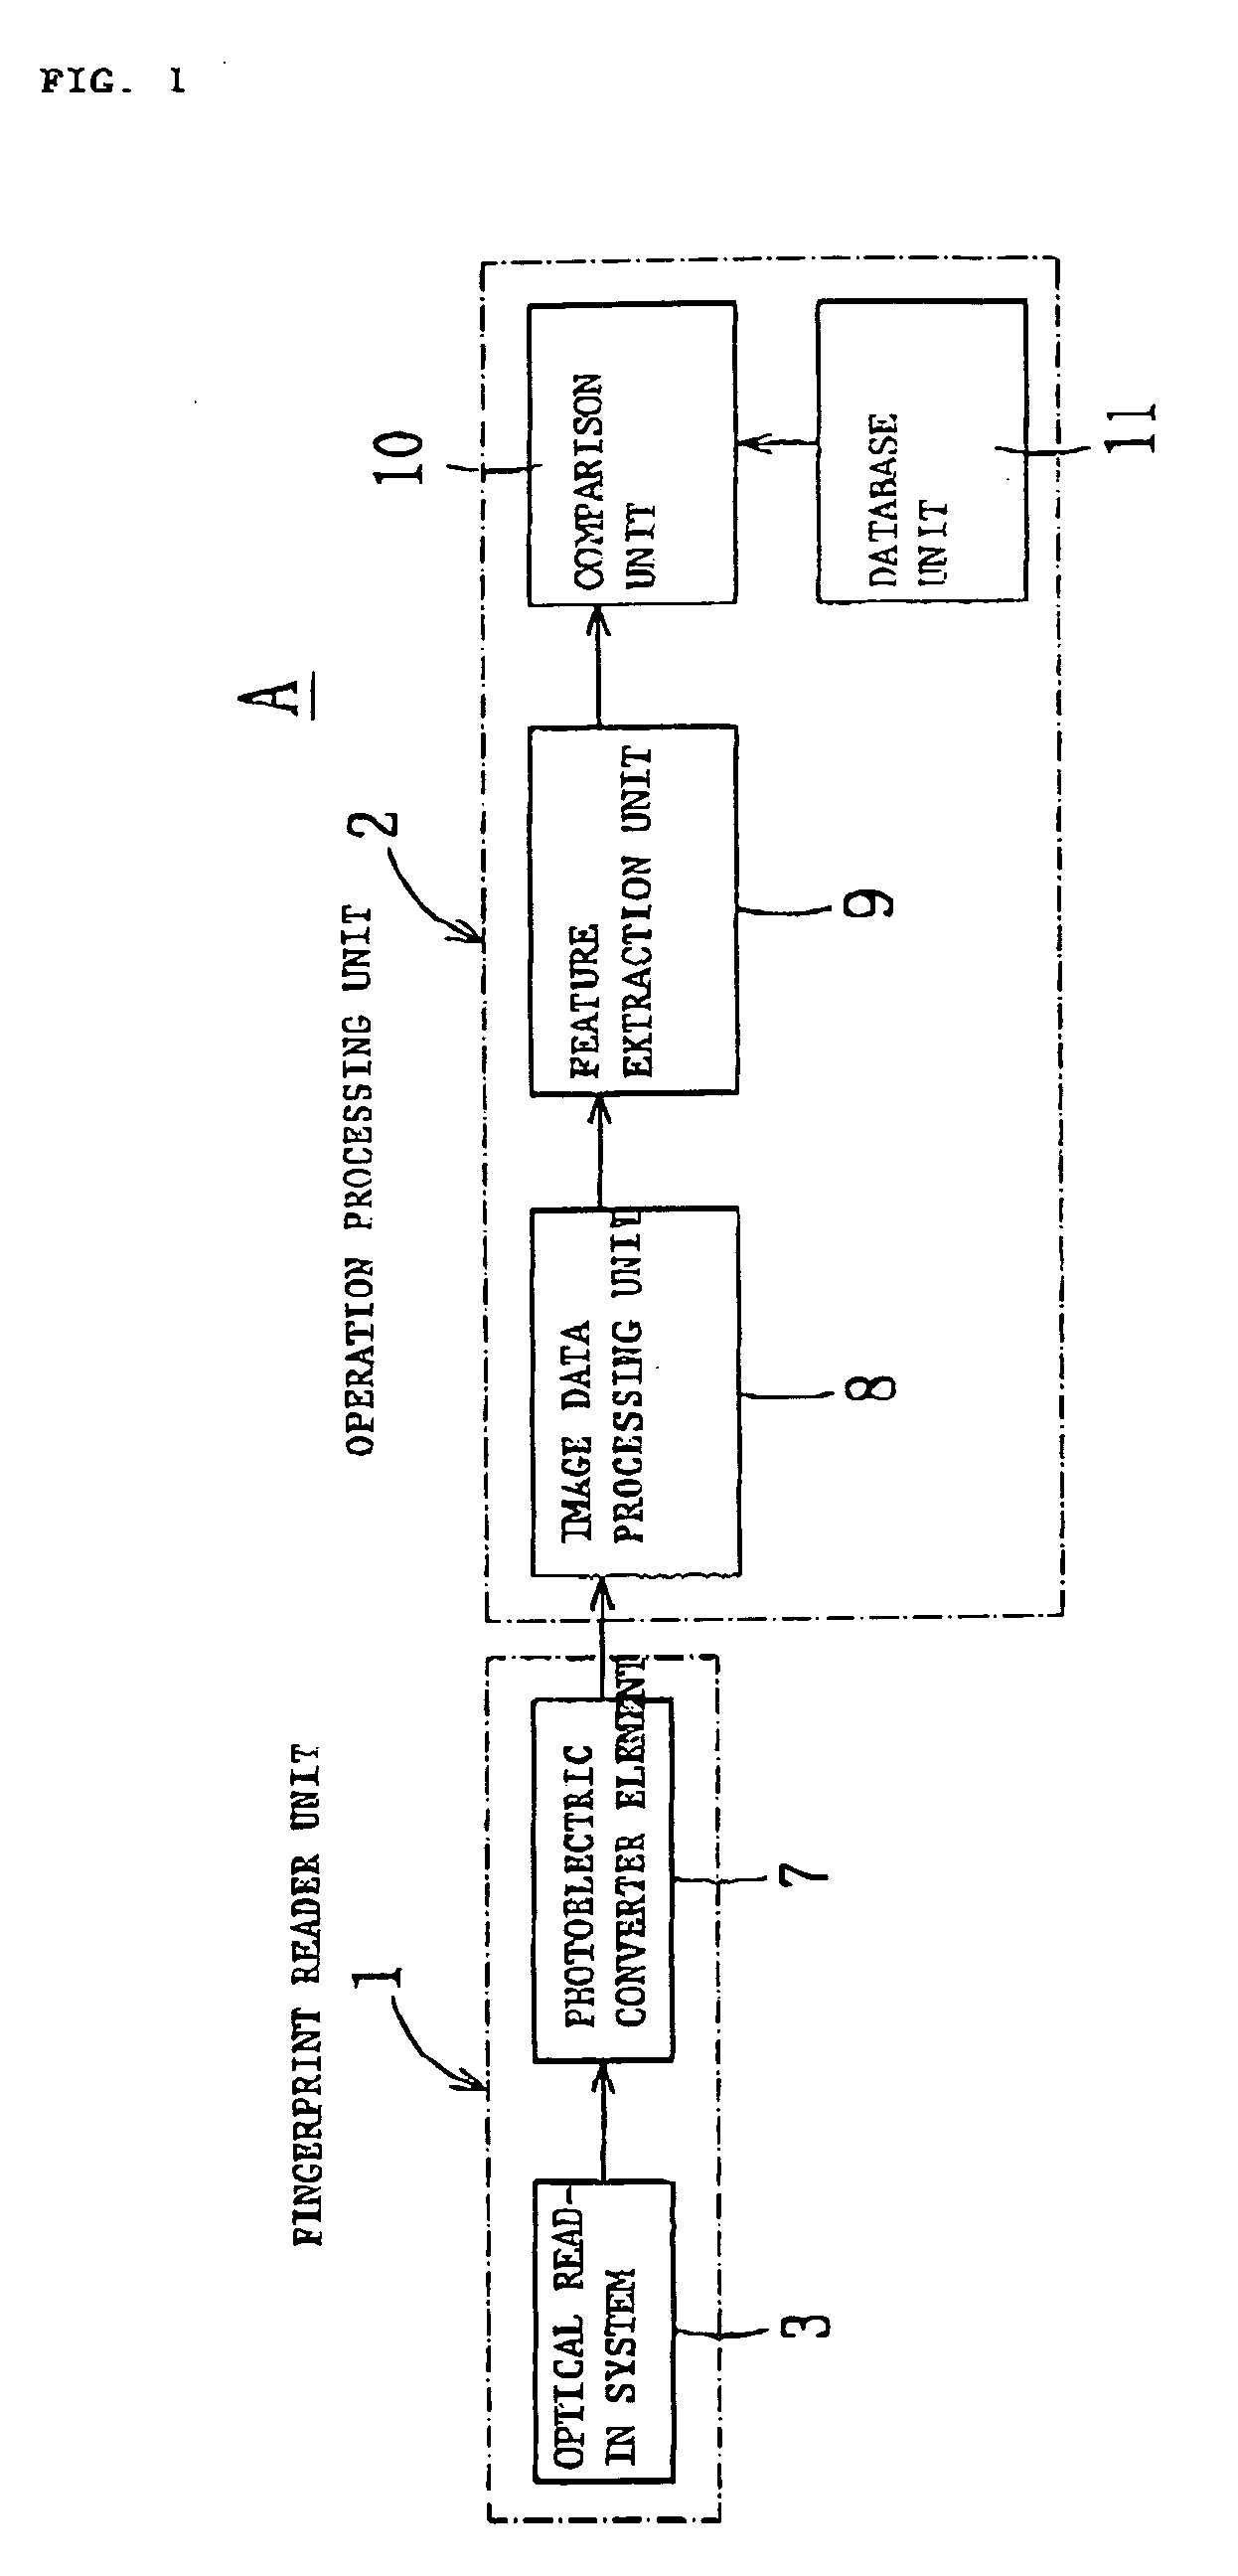 Fingerprint identification device equipped with a user recording unit